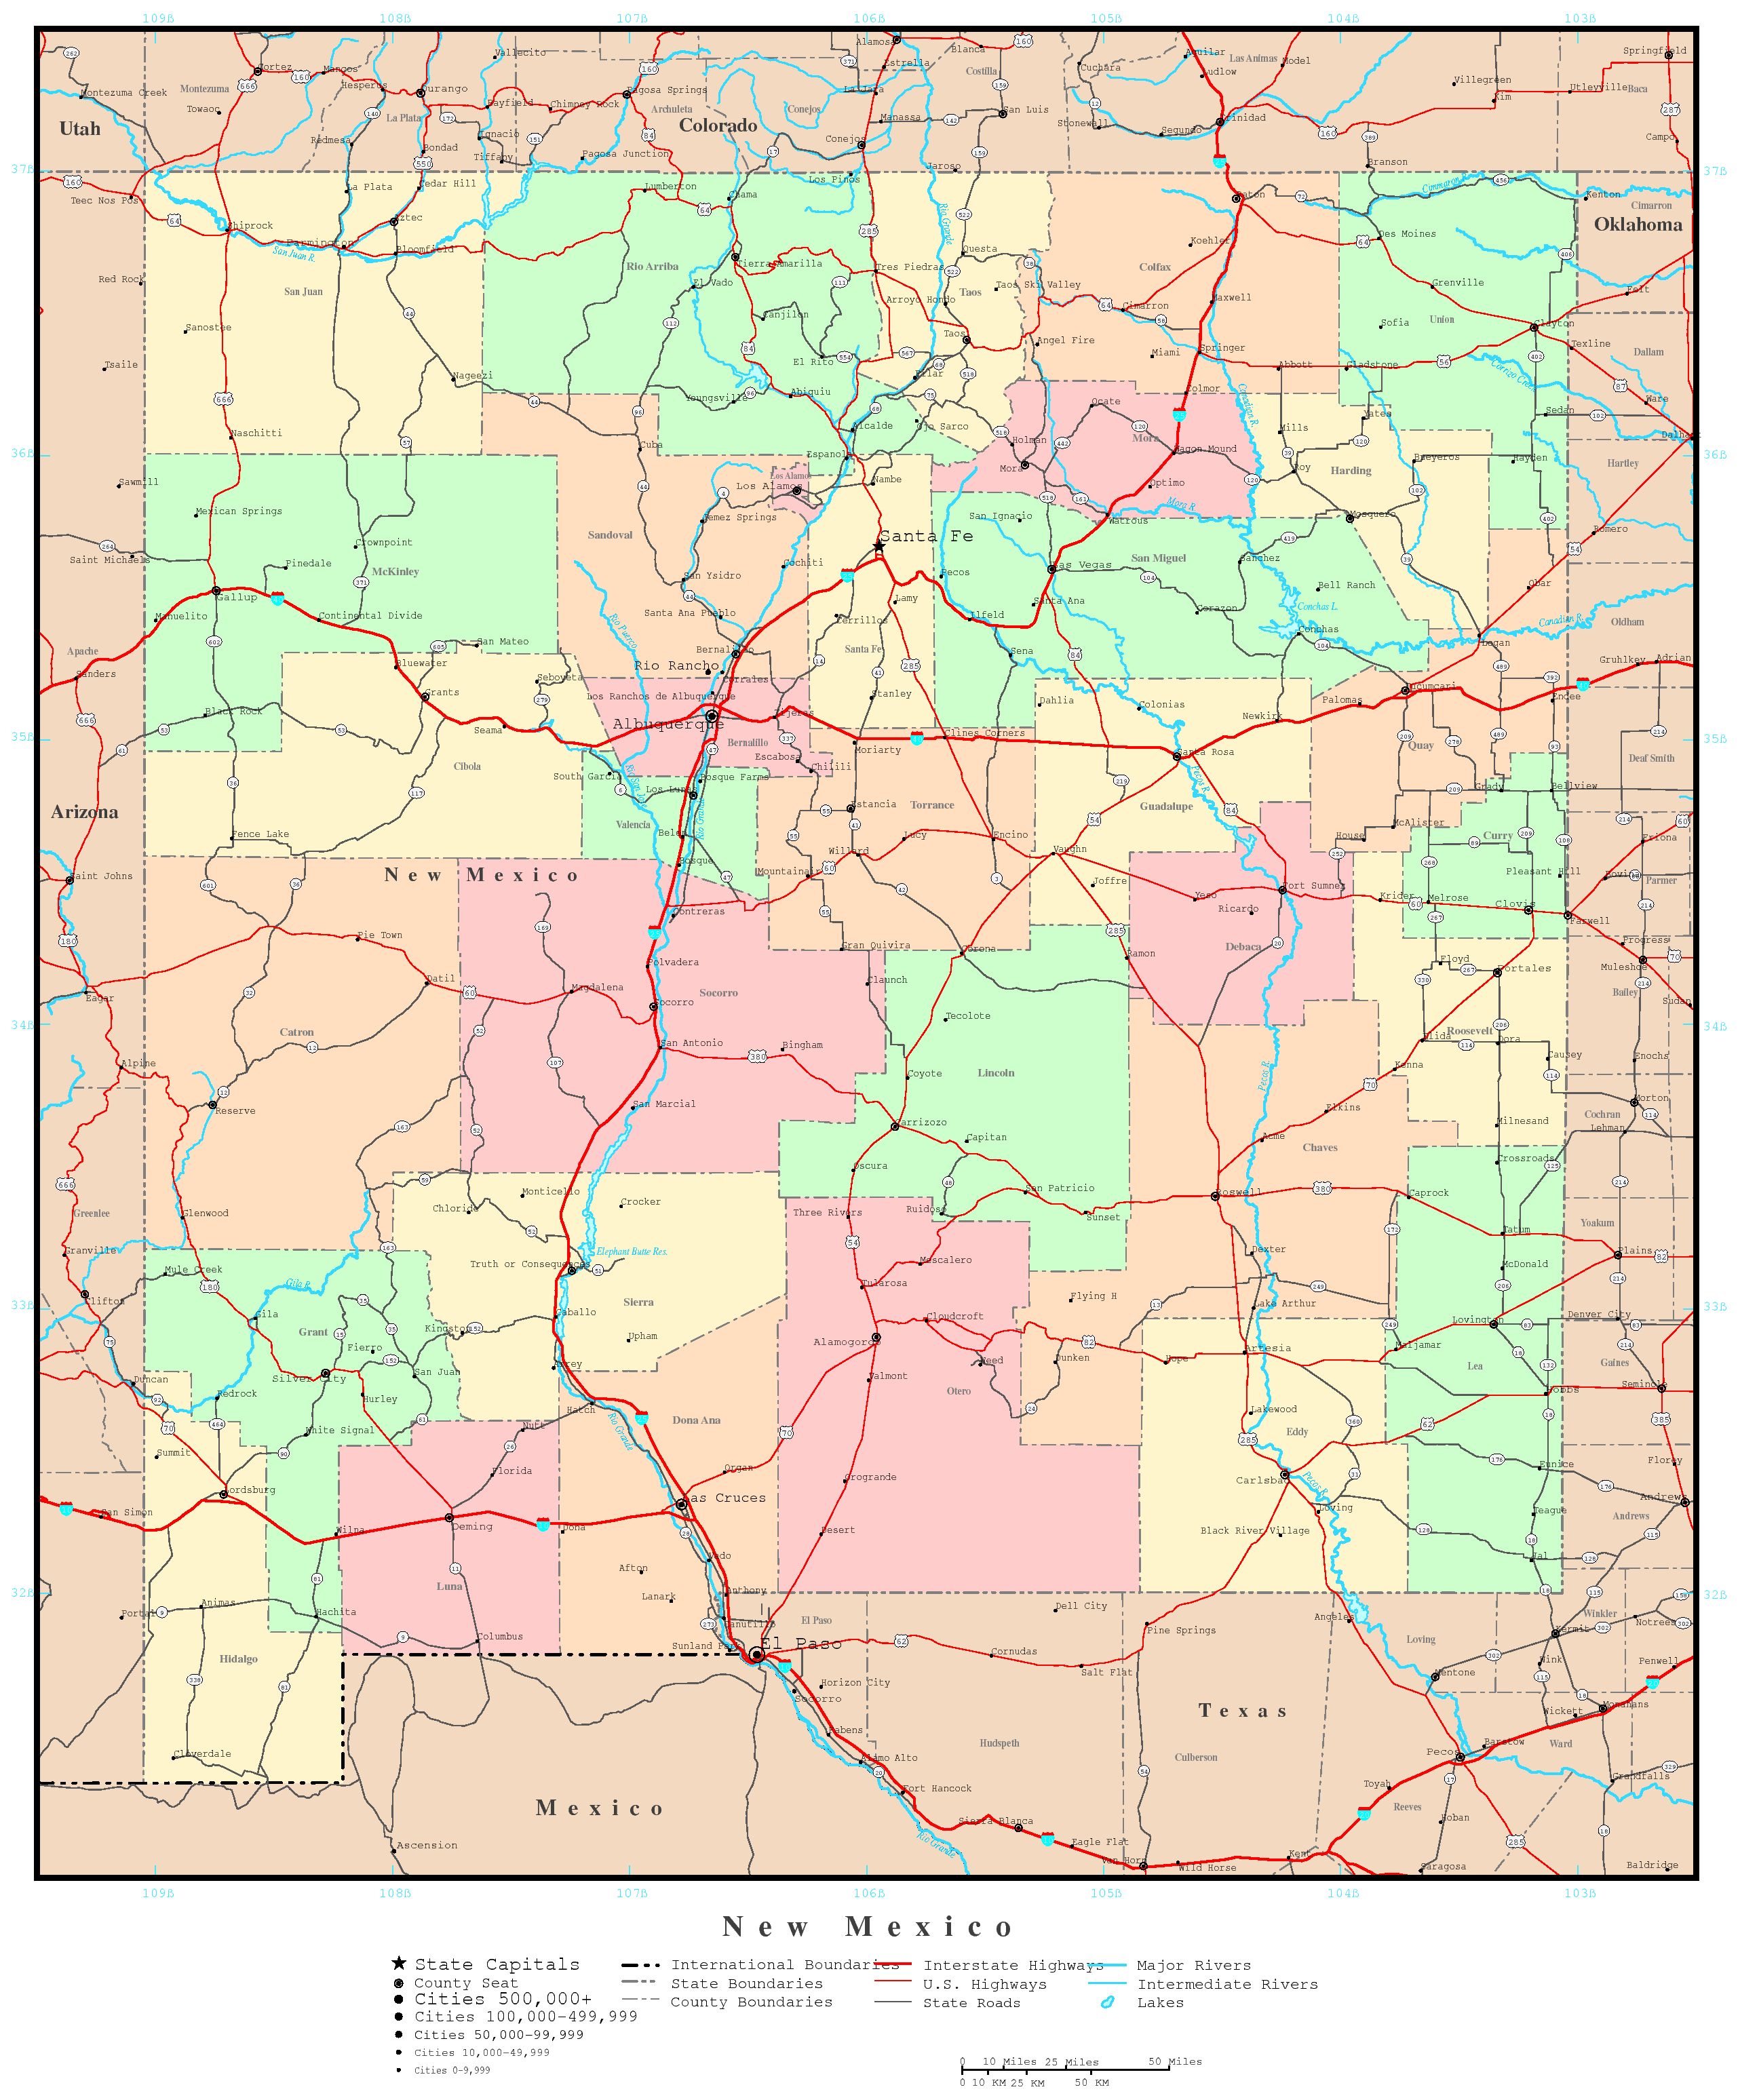 New Mexico Political Map